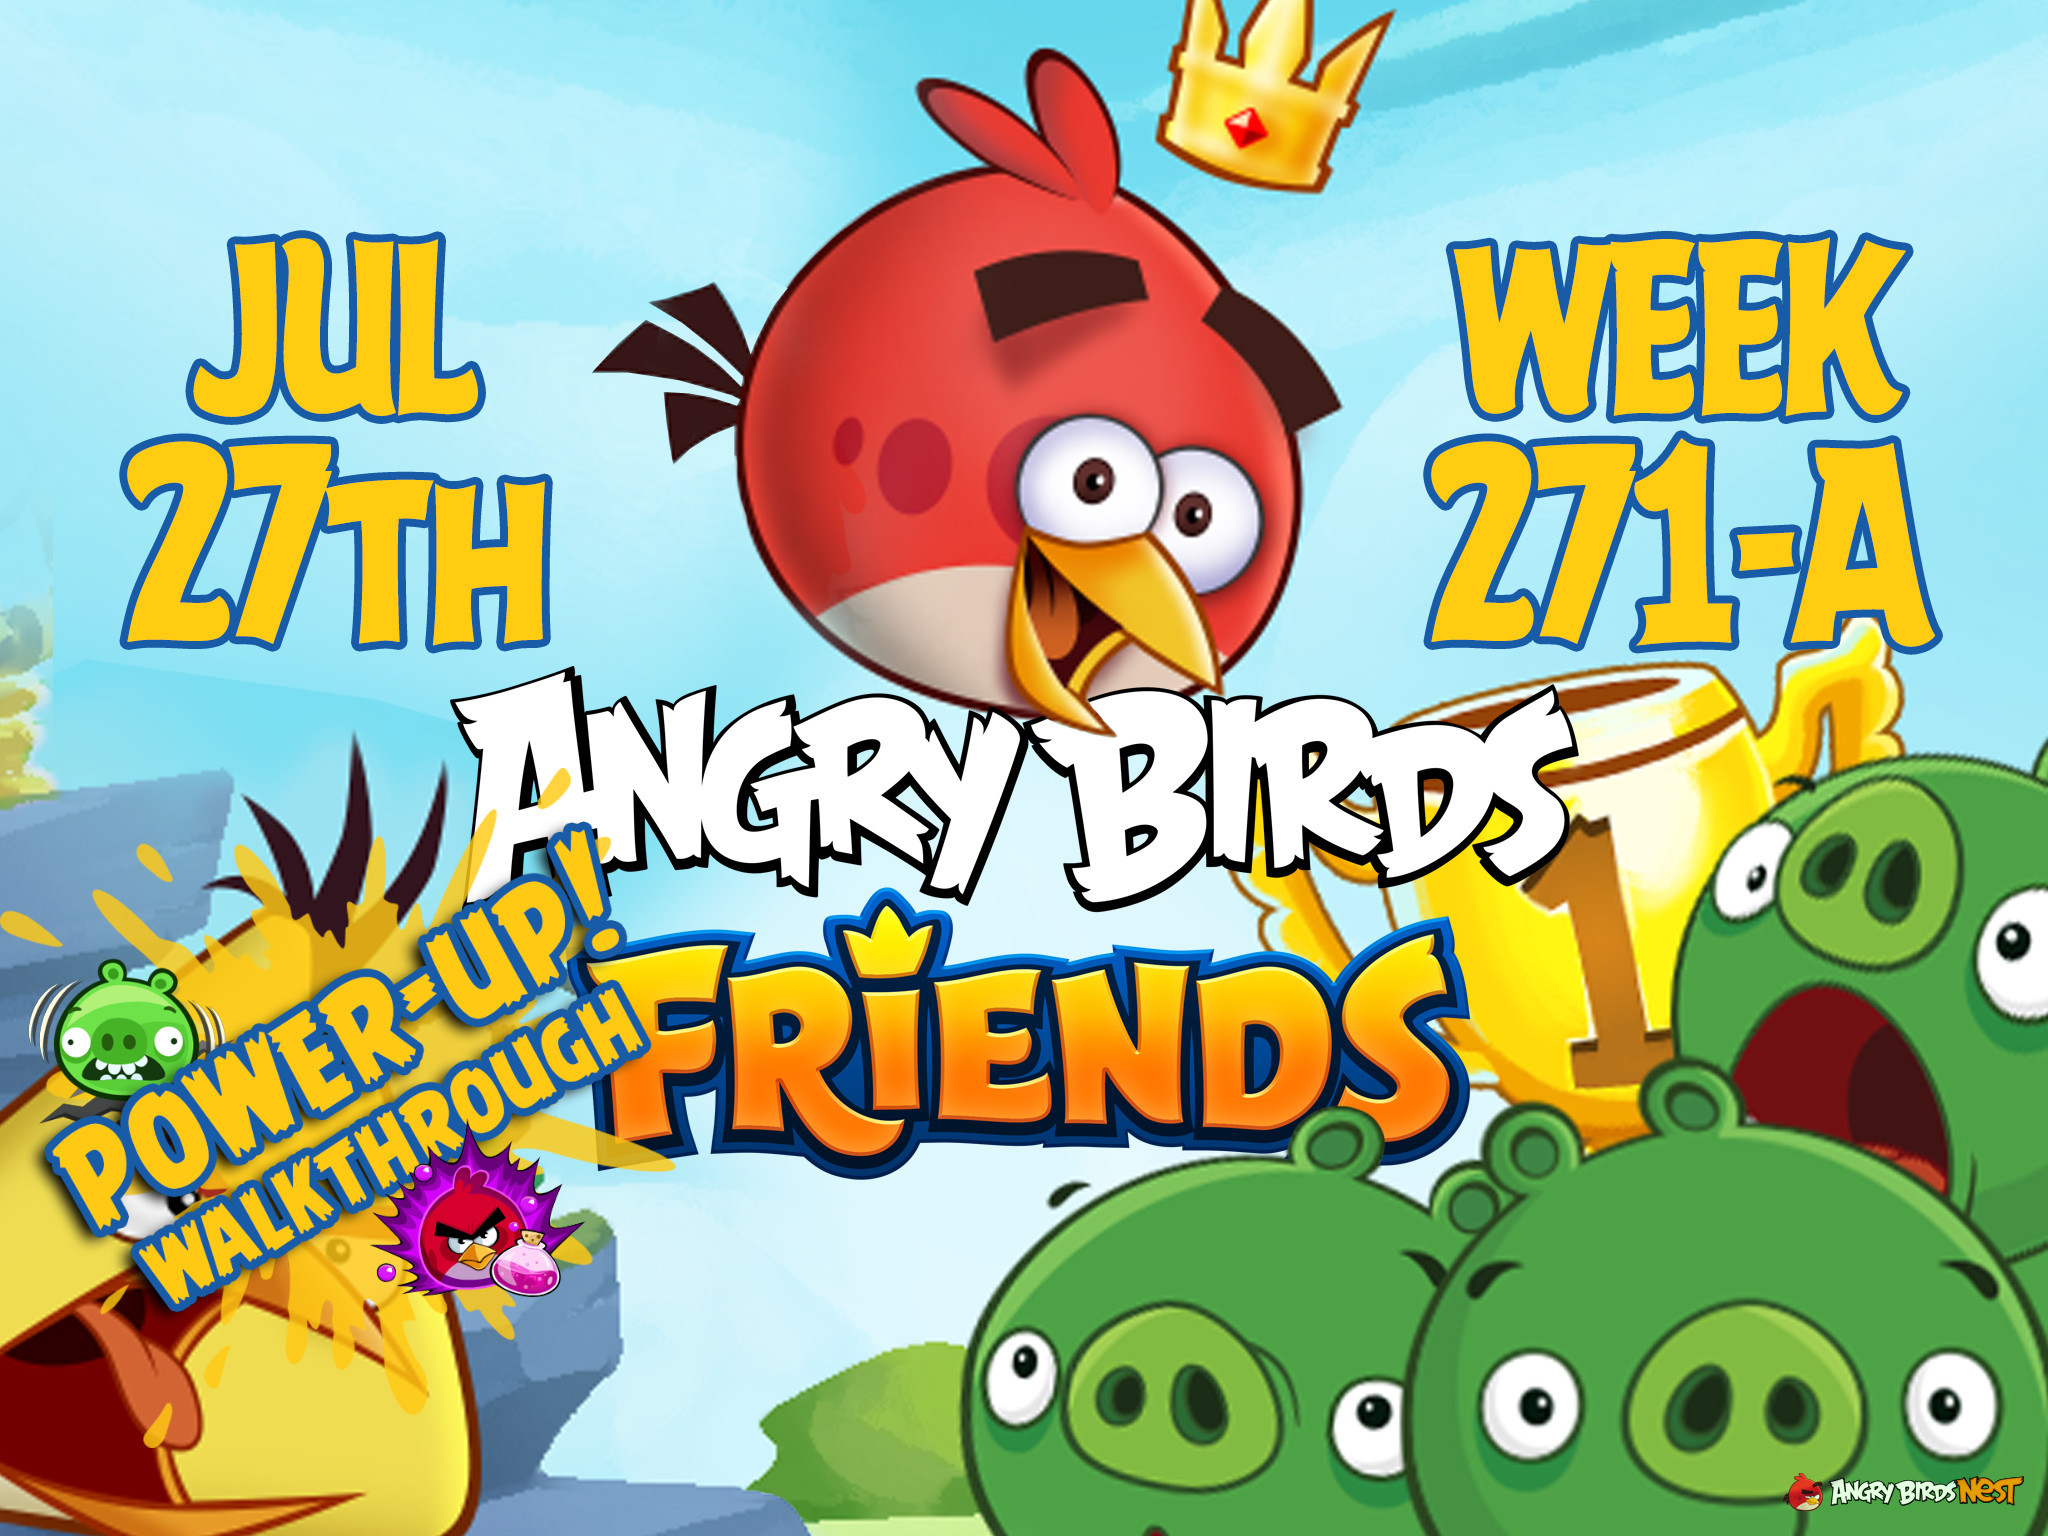 Angry Birds Friends Tournament Week 271-A Feature Image PU